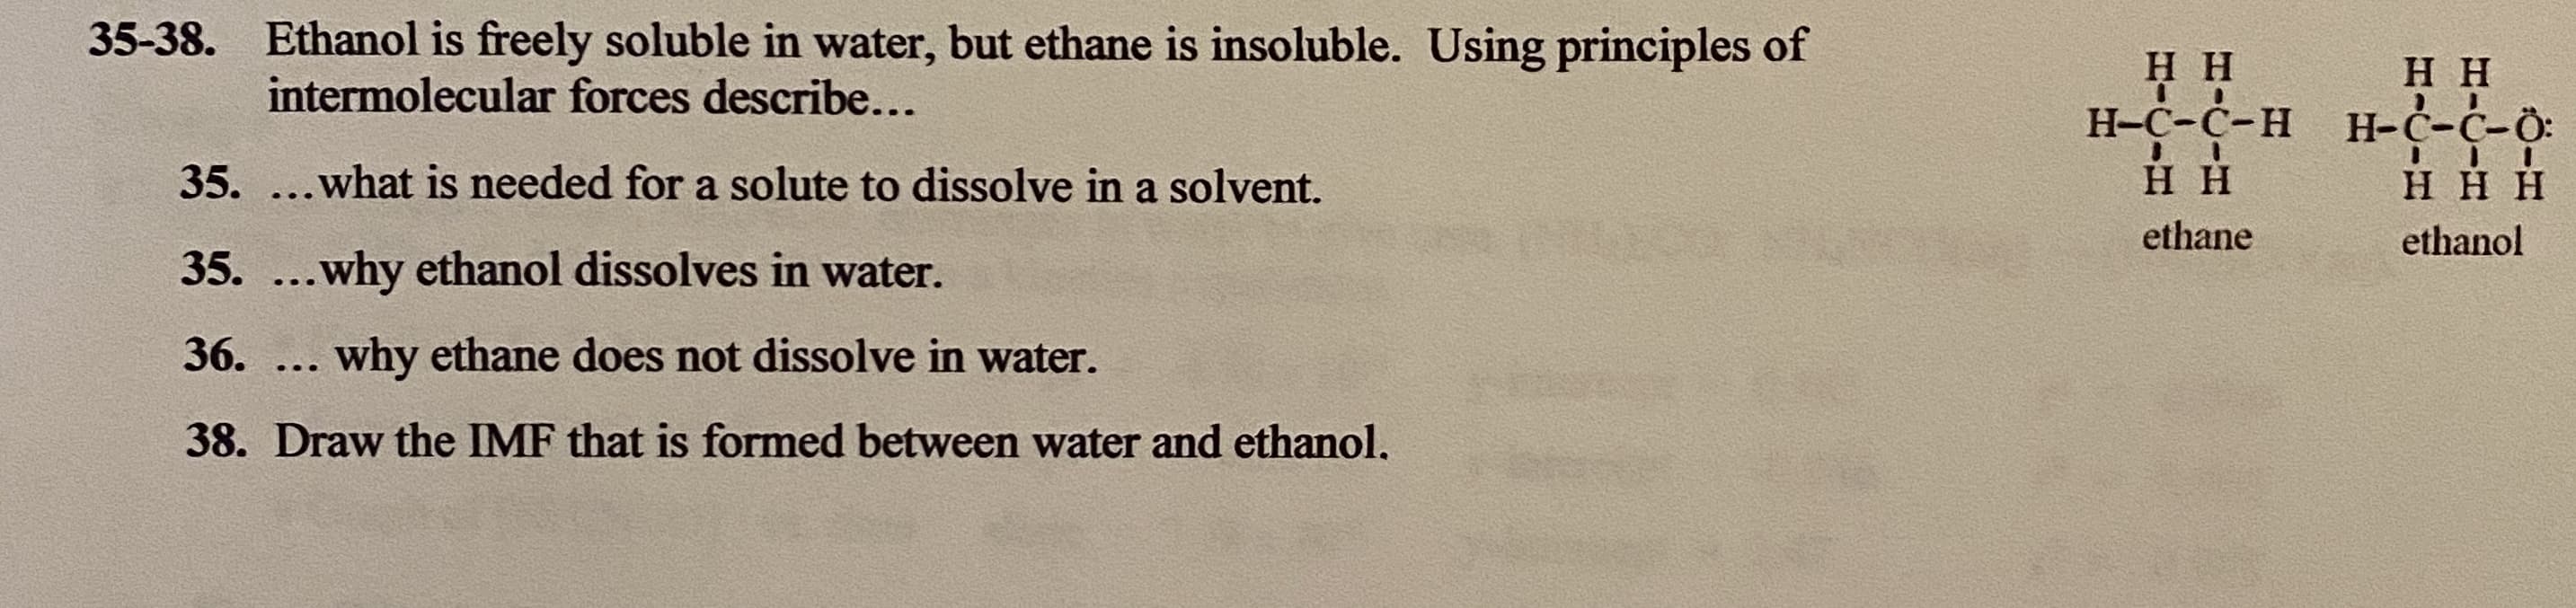 35-38. Ethanol is freely soluble in water, but ethane is insoluble. Using principles of
Нн
Н-С-С-н Н-С-С-О:
нн
intermolecular forces describe...
35. ...what is needed for a solute to dissolve in a solvent.
нн
ннн
ethane
ethanol
35. ...why ethanol dissolves in water.
36.
. why ethane does not dissolve in water.
...
38. Draw the IMF that is formed between water and ethanol.
